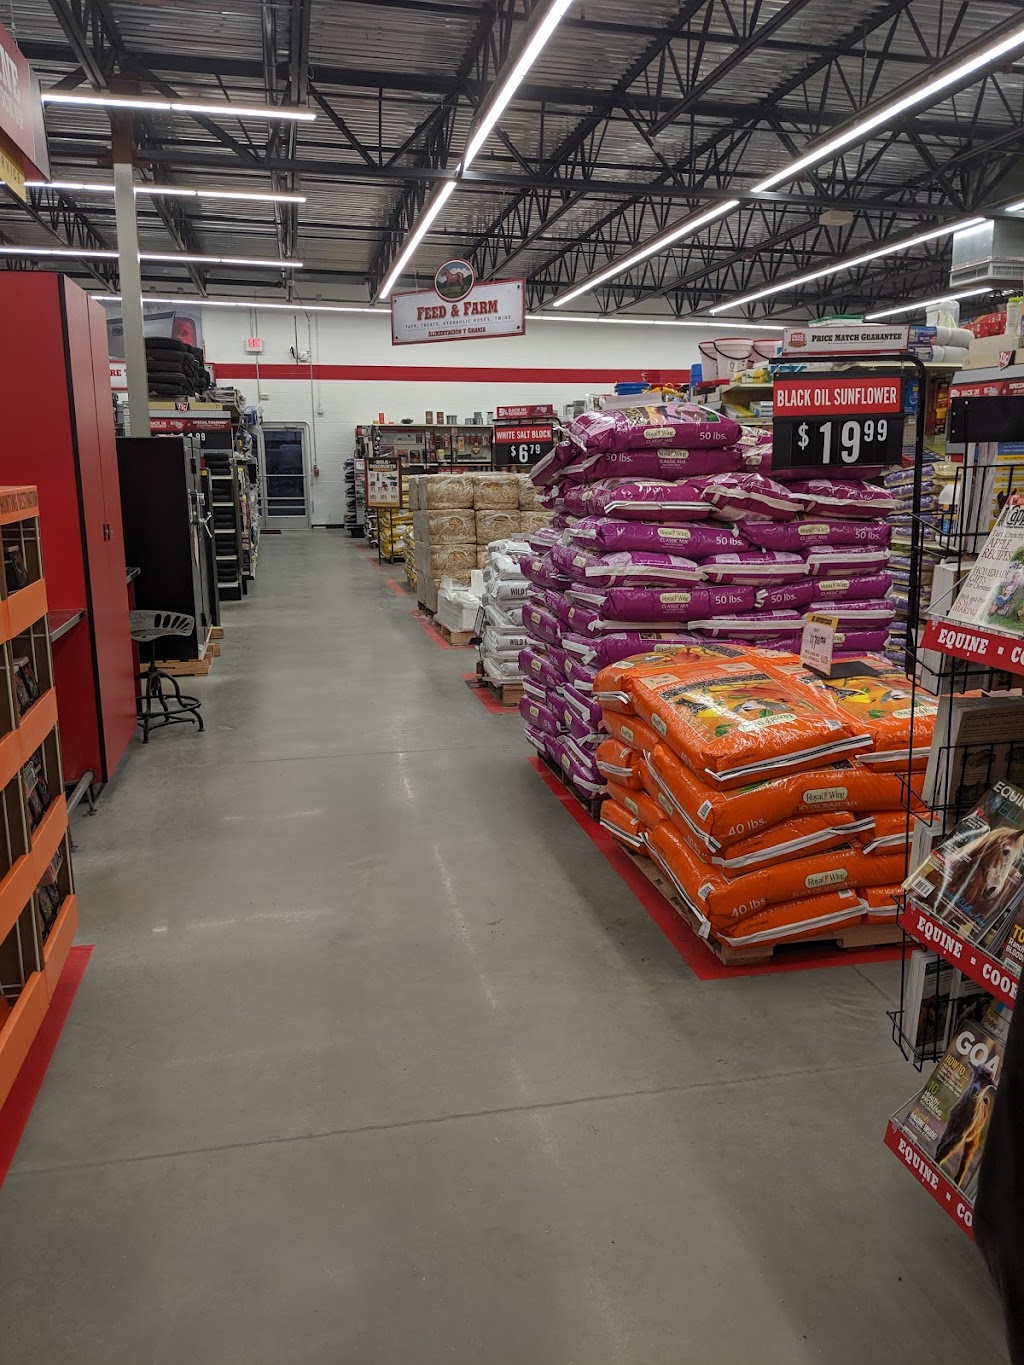 Tractor supply | 10838 Main St, North Collins, NY 14111 | Phone: (716) 337-3377